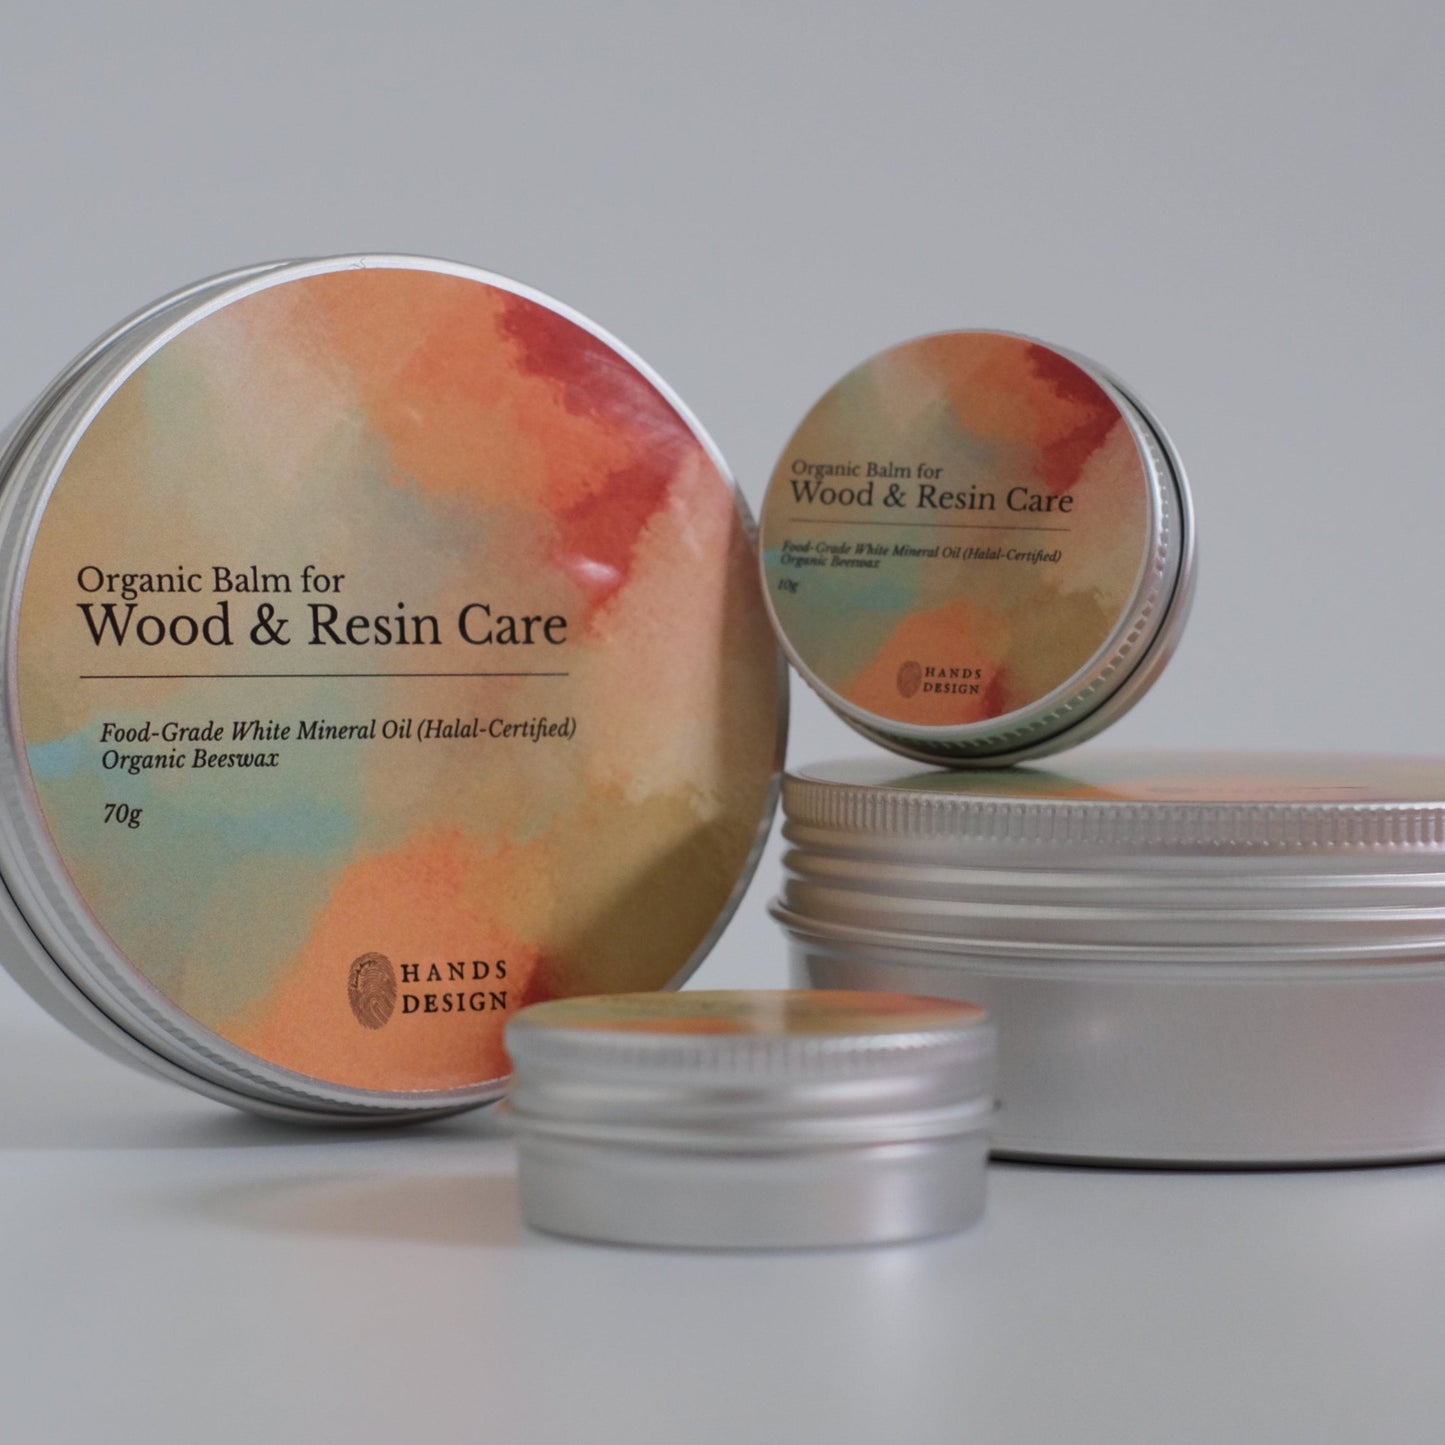 Product Care | Organic Balm for Wood & Resin Care